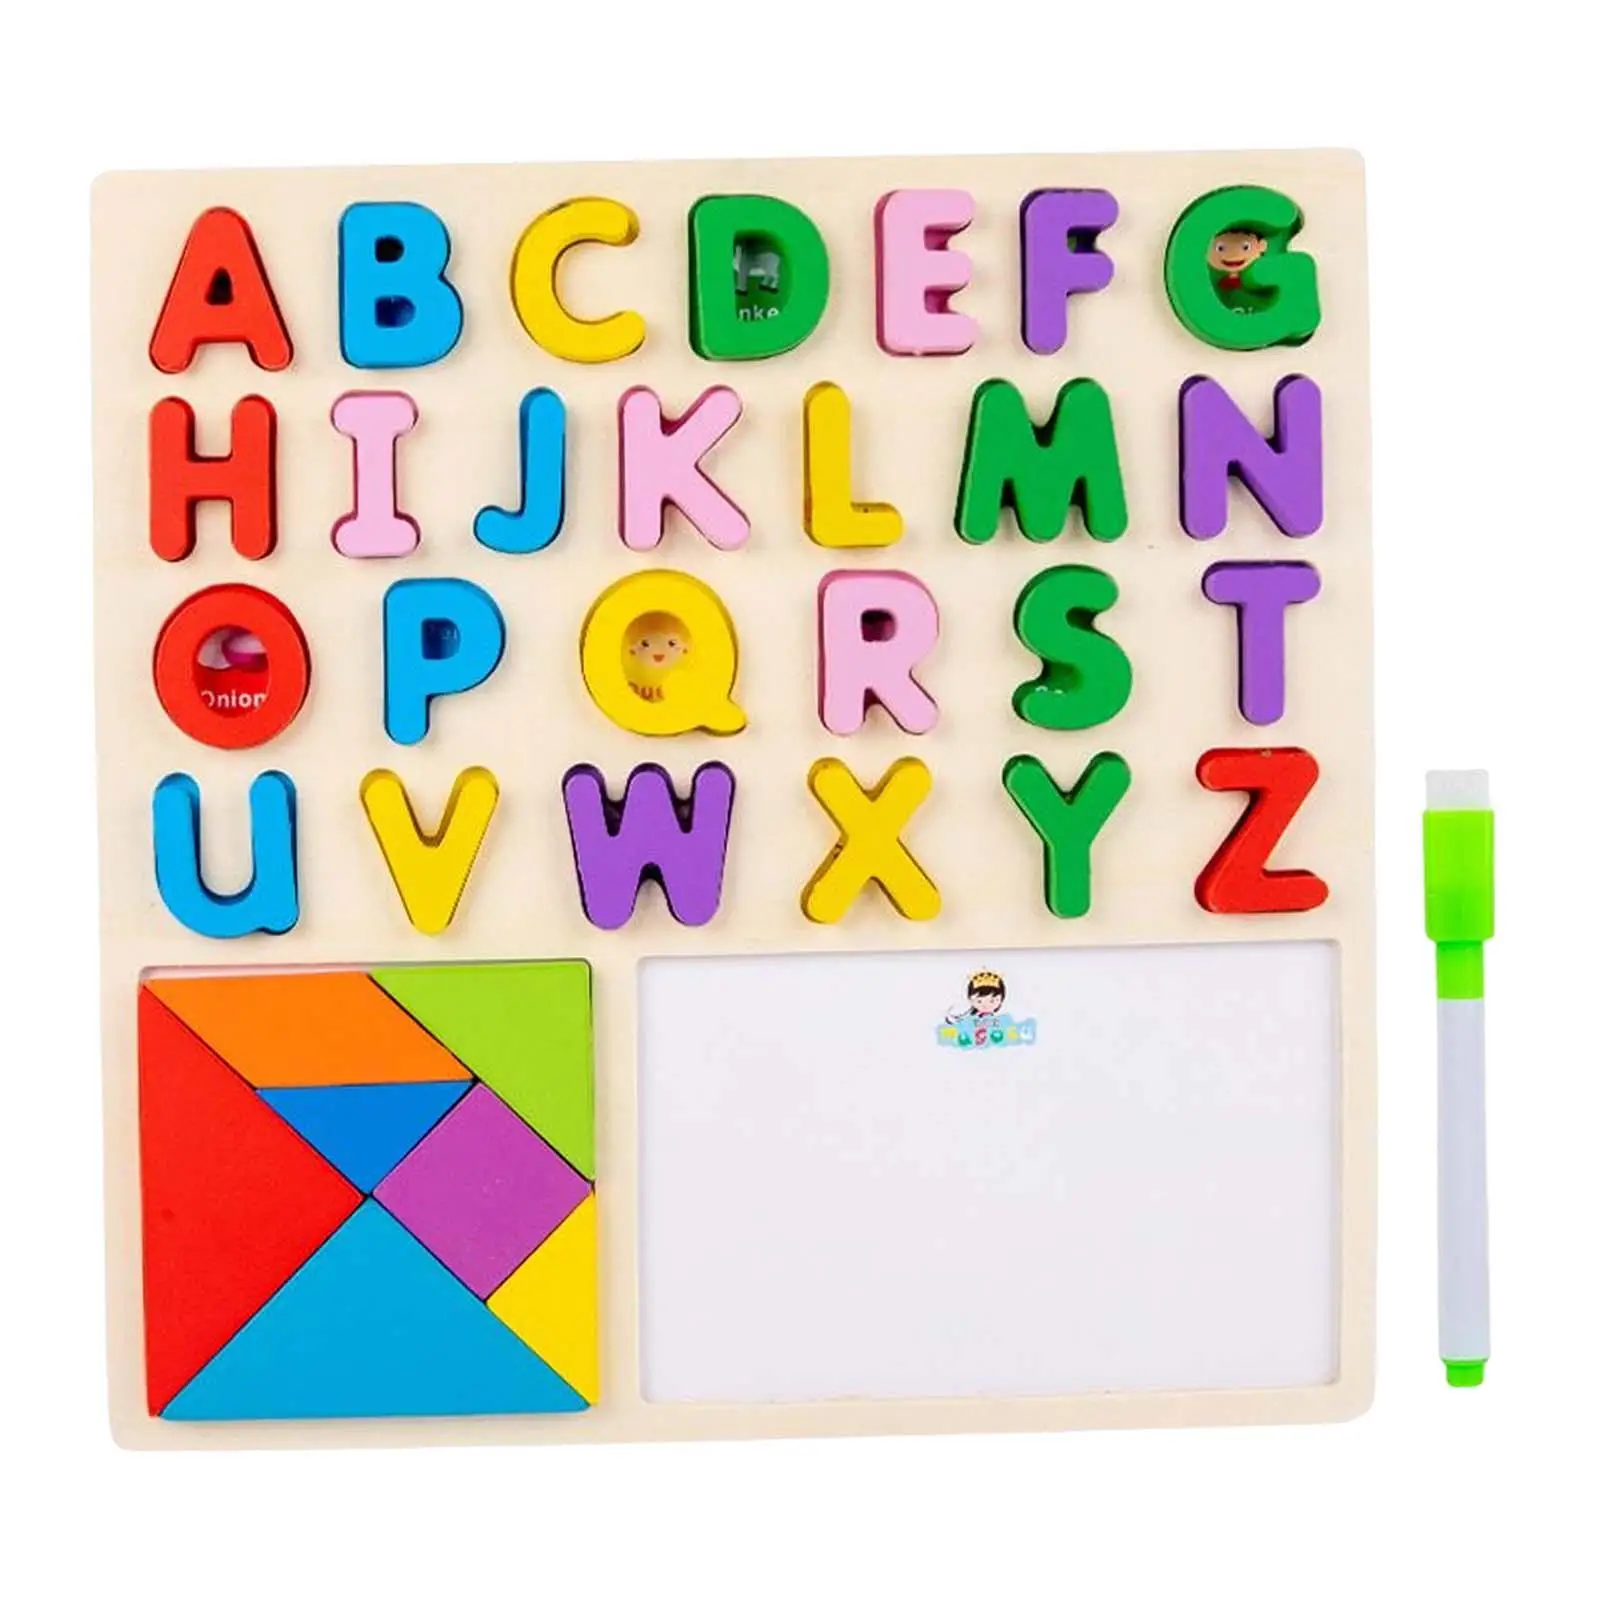 kids Puzzle Toys Educational Toys Multifunctional Puzzle Toy Gifts Alphabet Number Shape Puzzles for Boys Girls